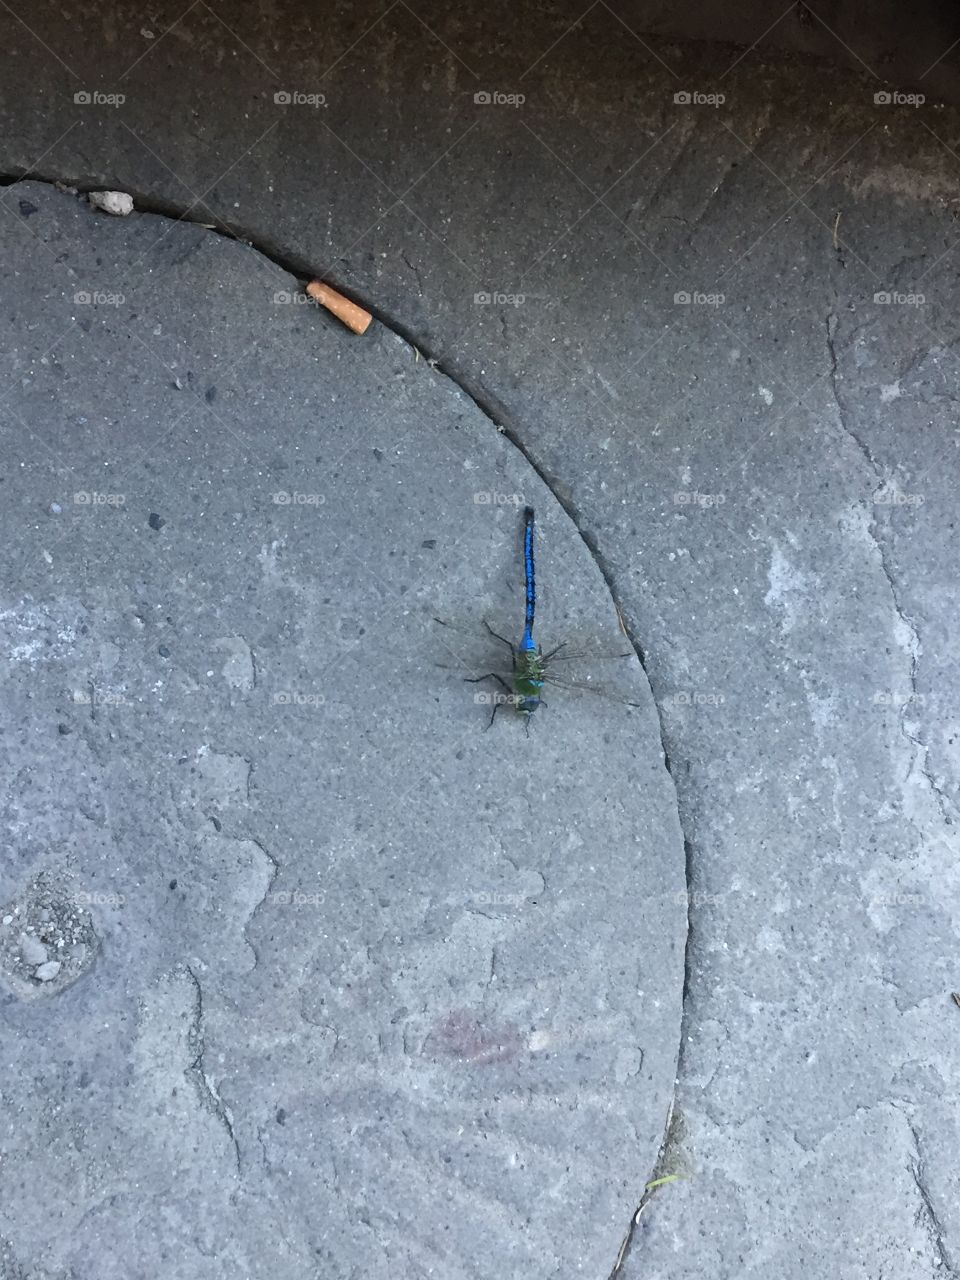 A beautiful blue dragonfly resting in a semicircle on the sidewalk, shot from above.